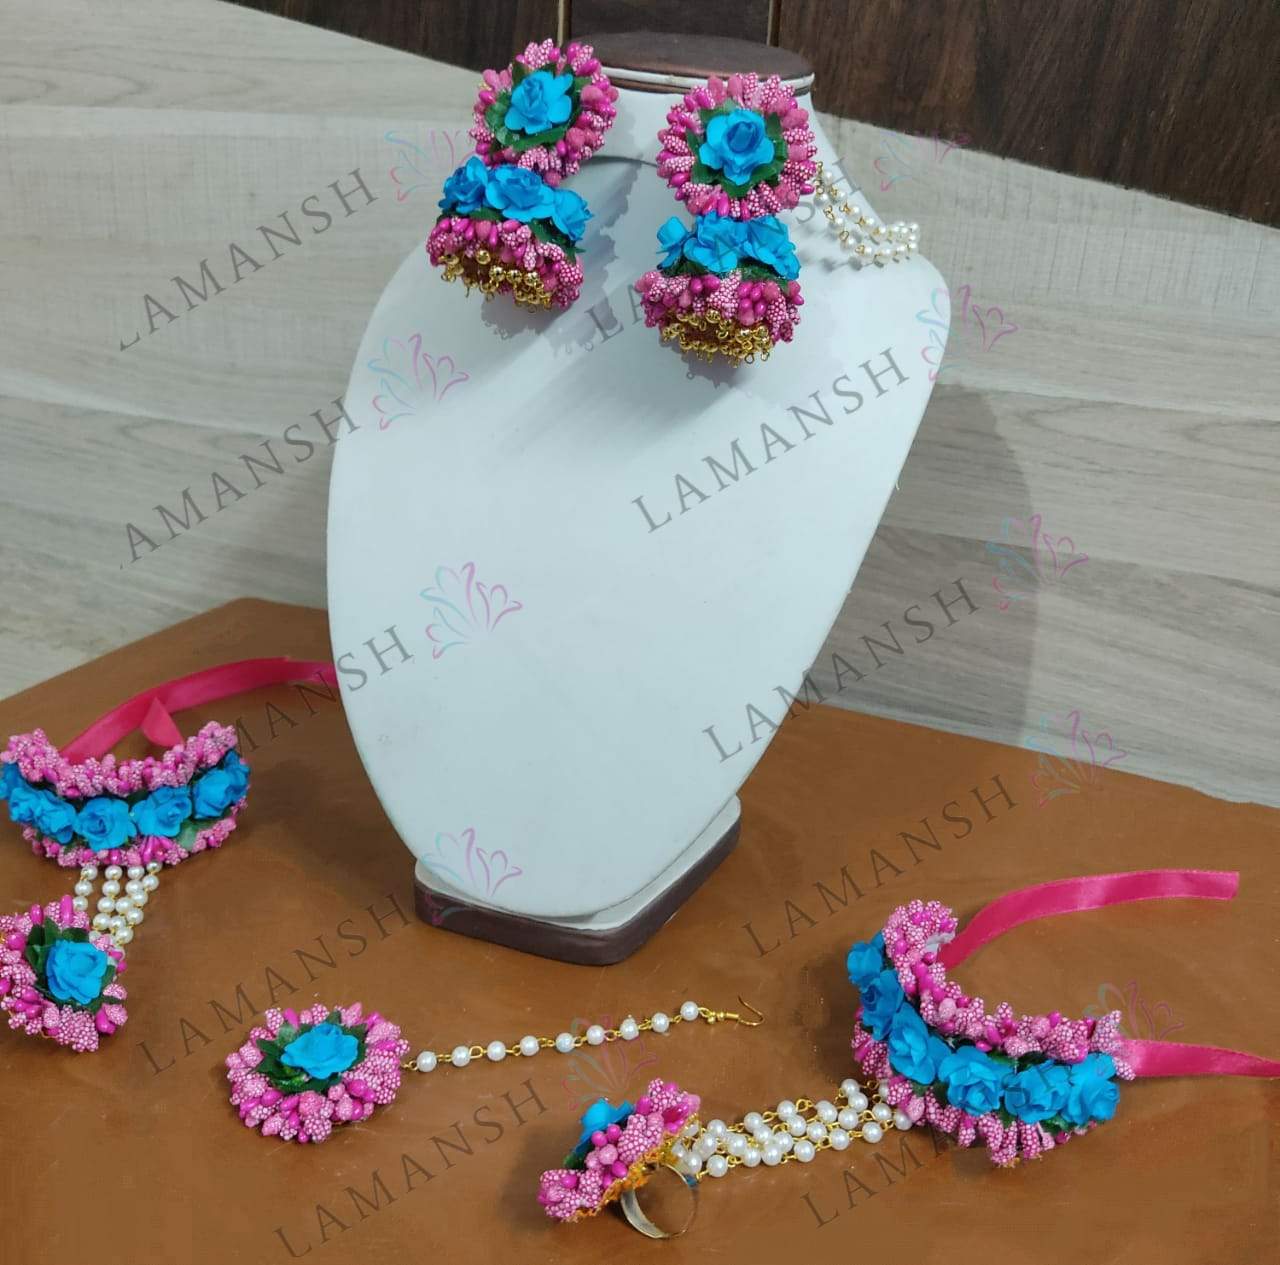 LAMANSH Flower Jewellery Pink-Blue / 2 Bracelets attached to Ring & 2 earrings with side chain & 1 maangtika LAMANSH Floral 🌺 Bracelets Attached to Ring, Maangtika & Earrings set